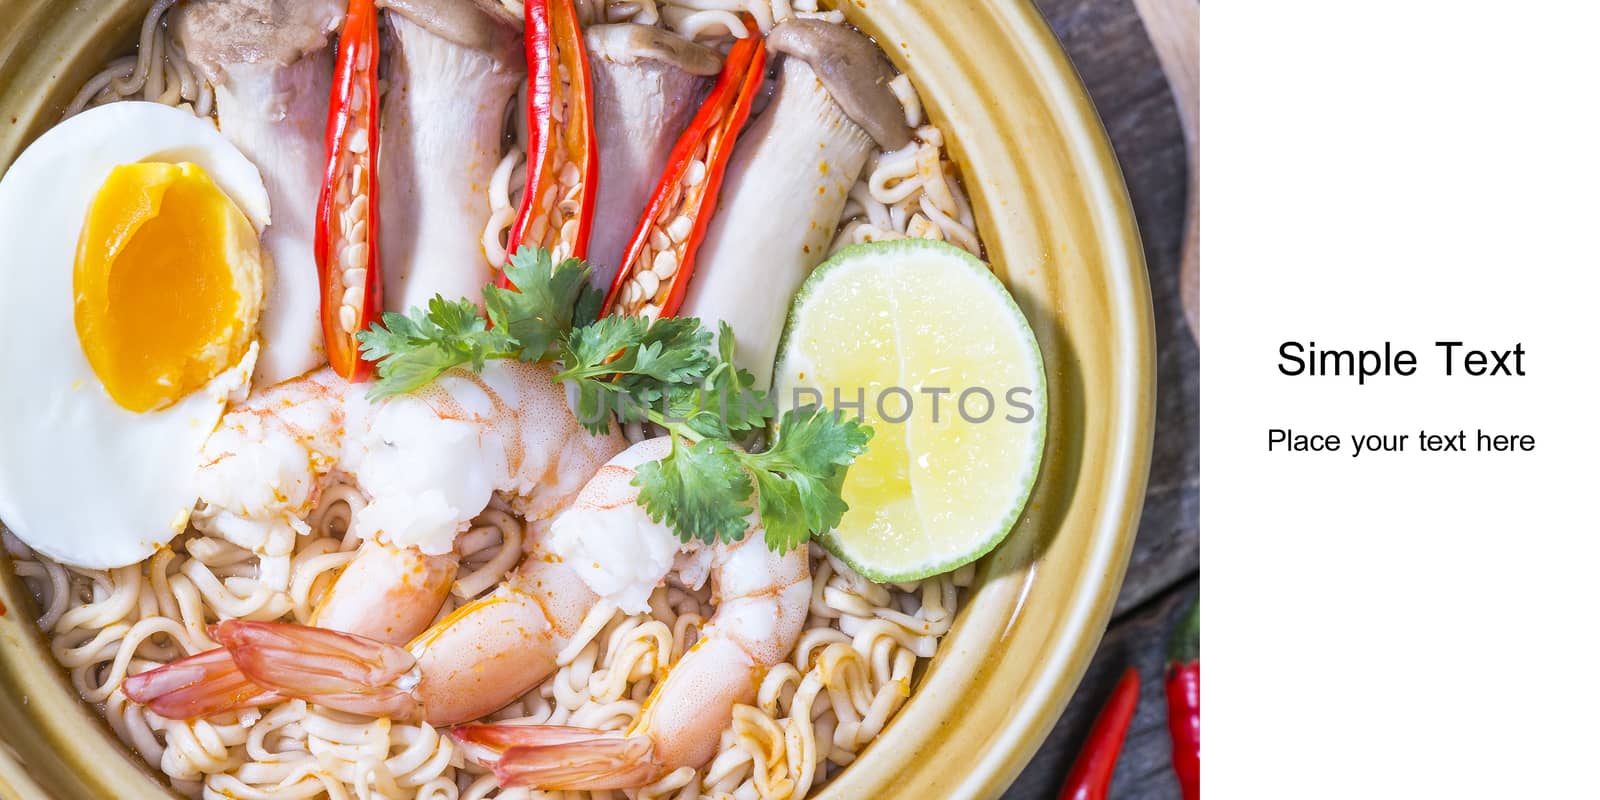 Thai food style noodle, tom yum kung on wood background and space for text

